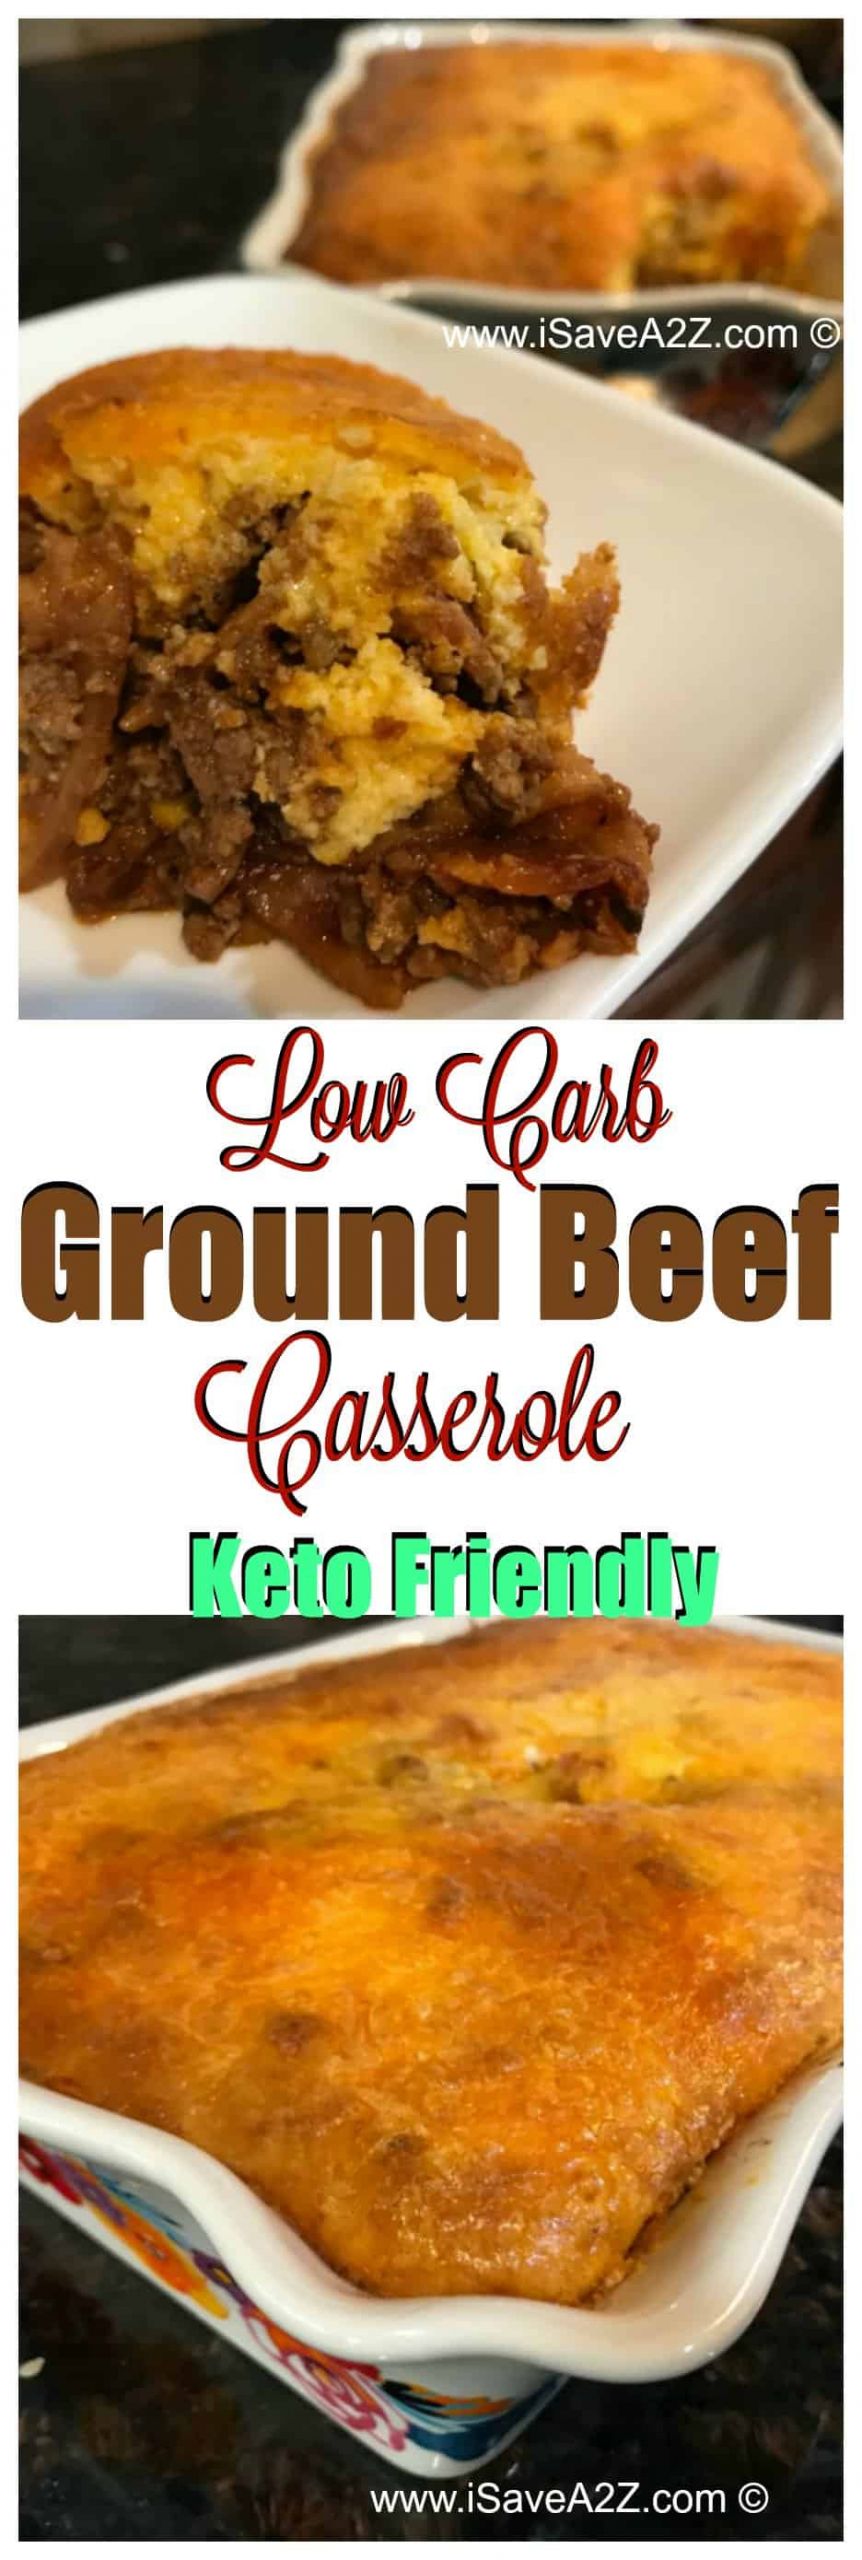 Ground Beef Keto Recipes Low Carb
 Keto Friendly Low Carb Beef Casserole Recipe iSaveA2Z